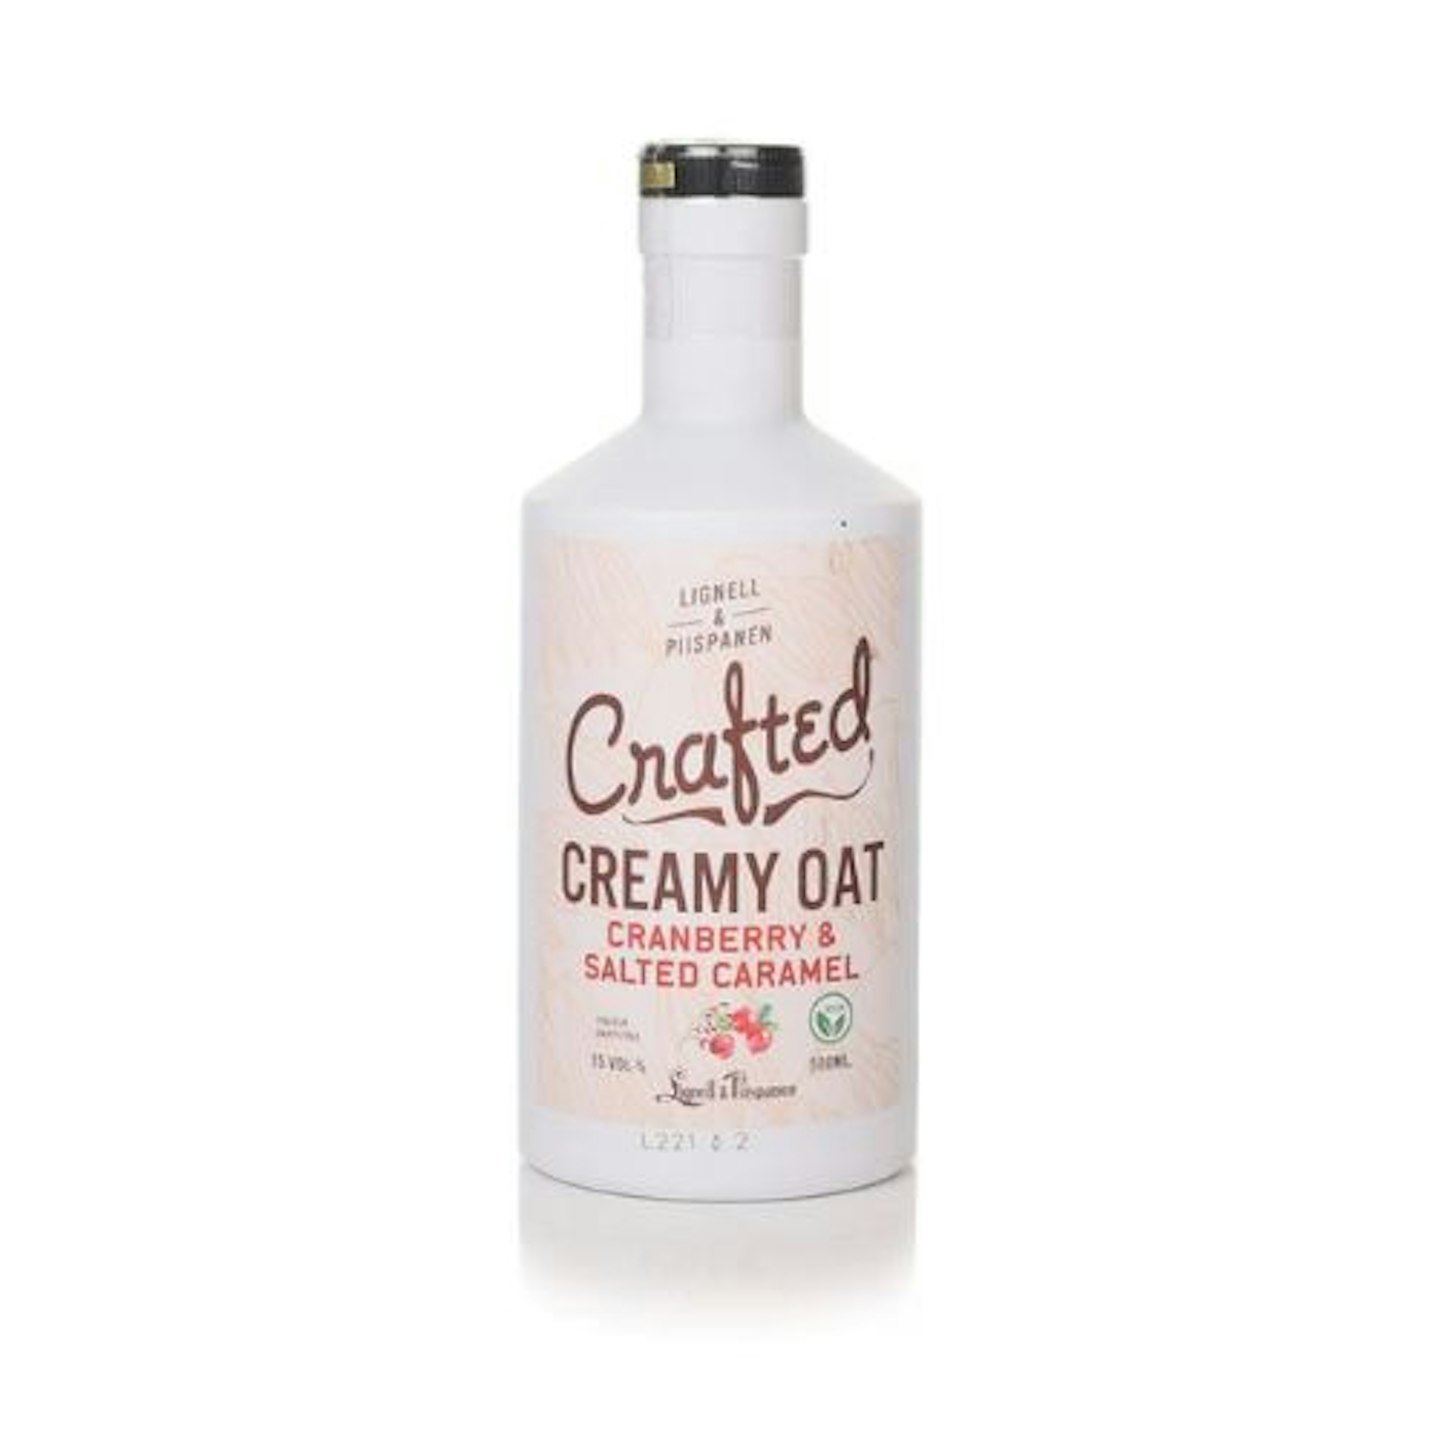 Crafted Creamy Oat Cranberry and Salted Caramel